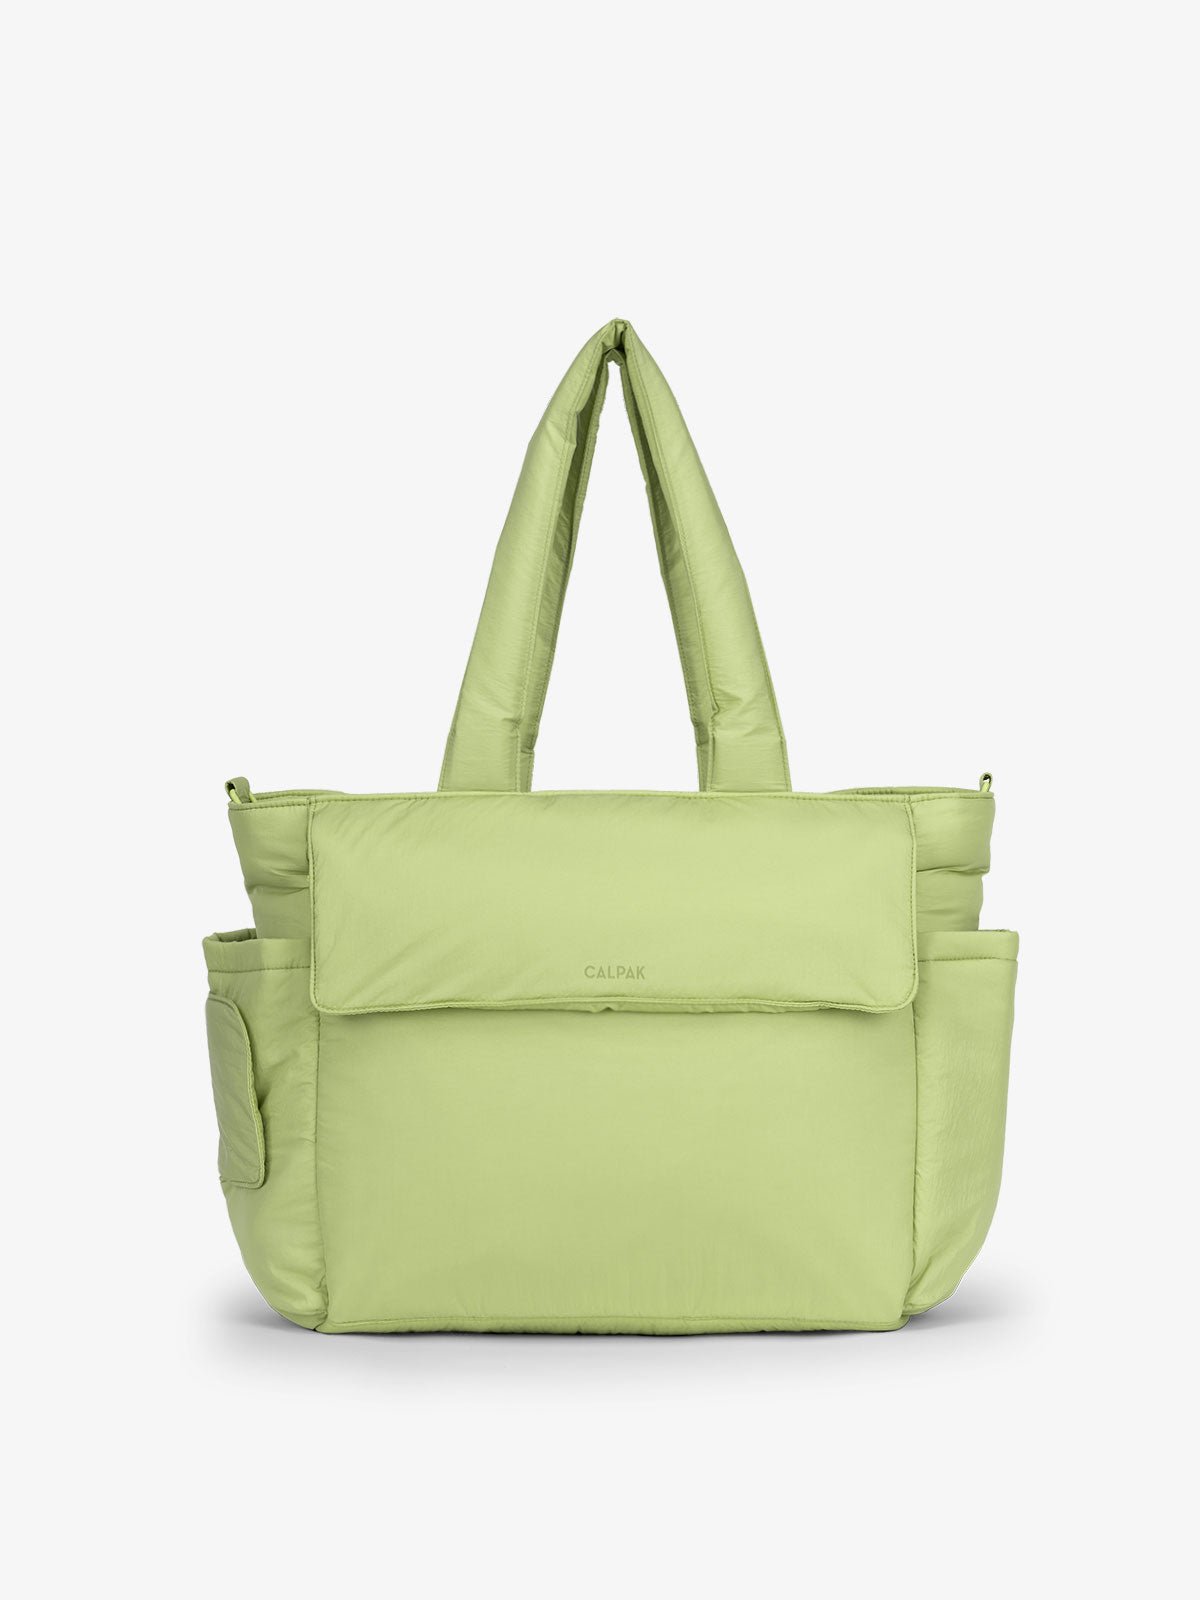 CALPAK Diaper Tote Bag with Laptop Sleeve made with durable, recycled, water-resistant material and a magnetic front pocket closure lime